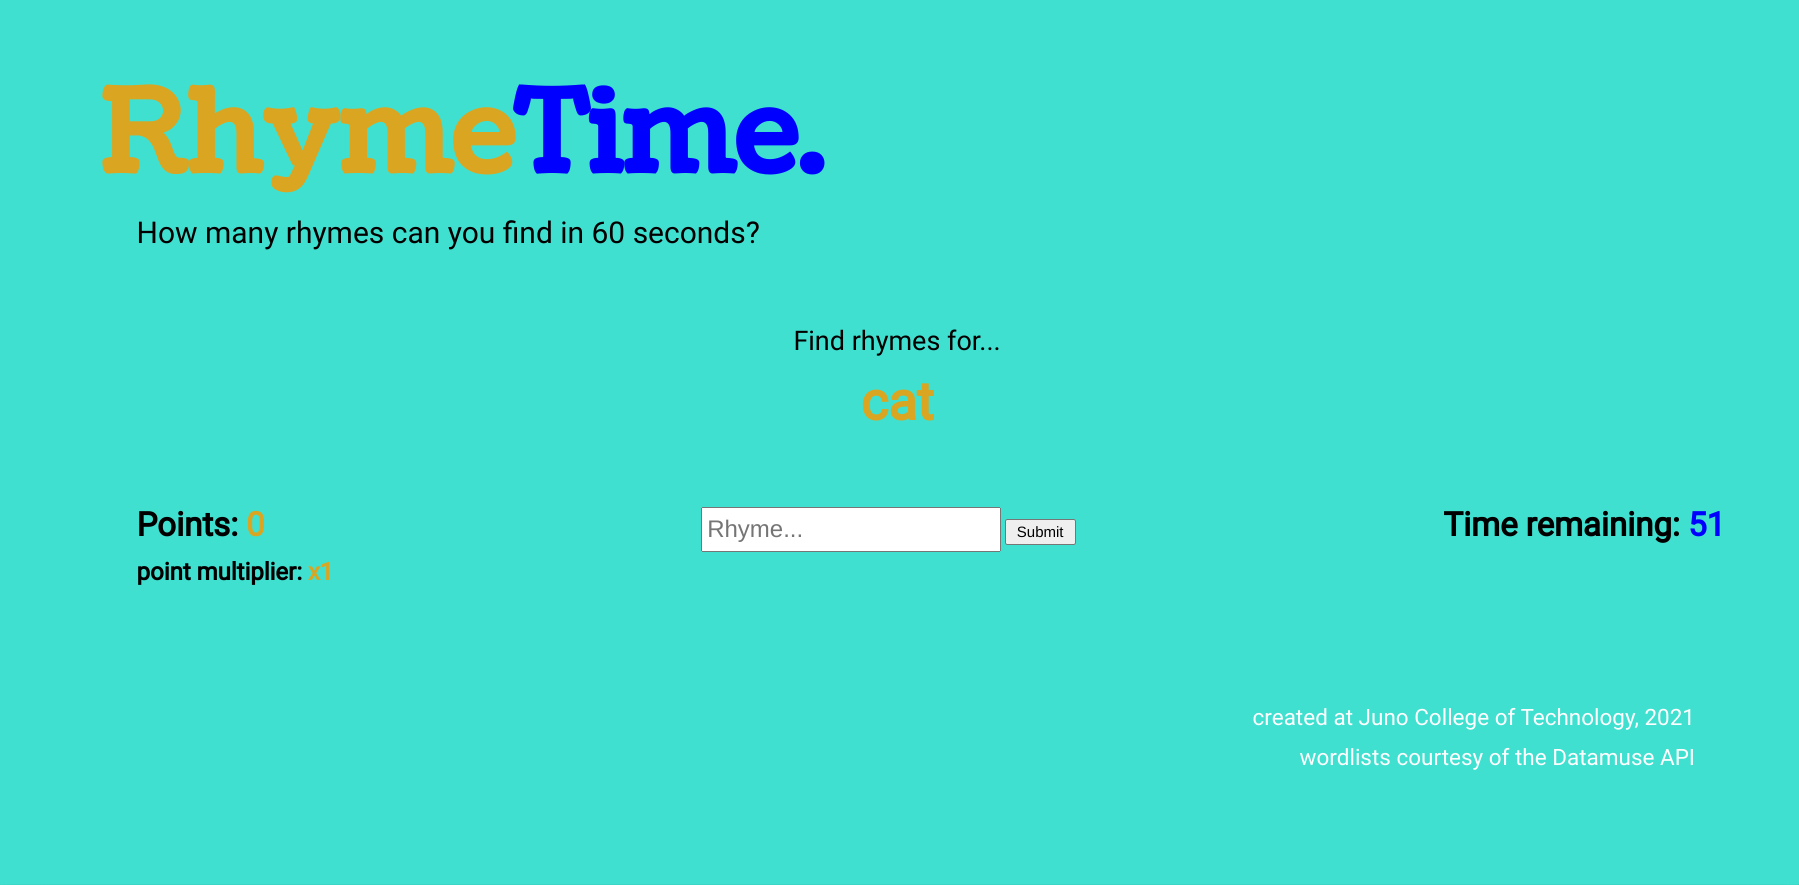 An image of the web app 'RhymeTime'